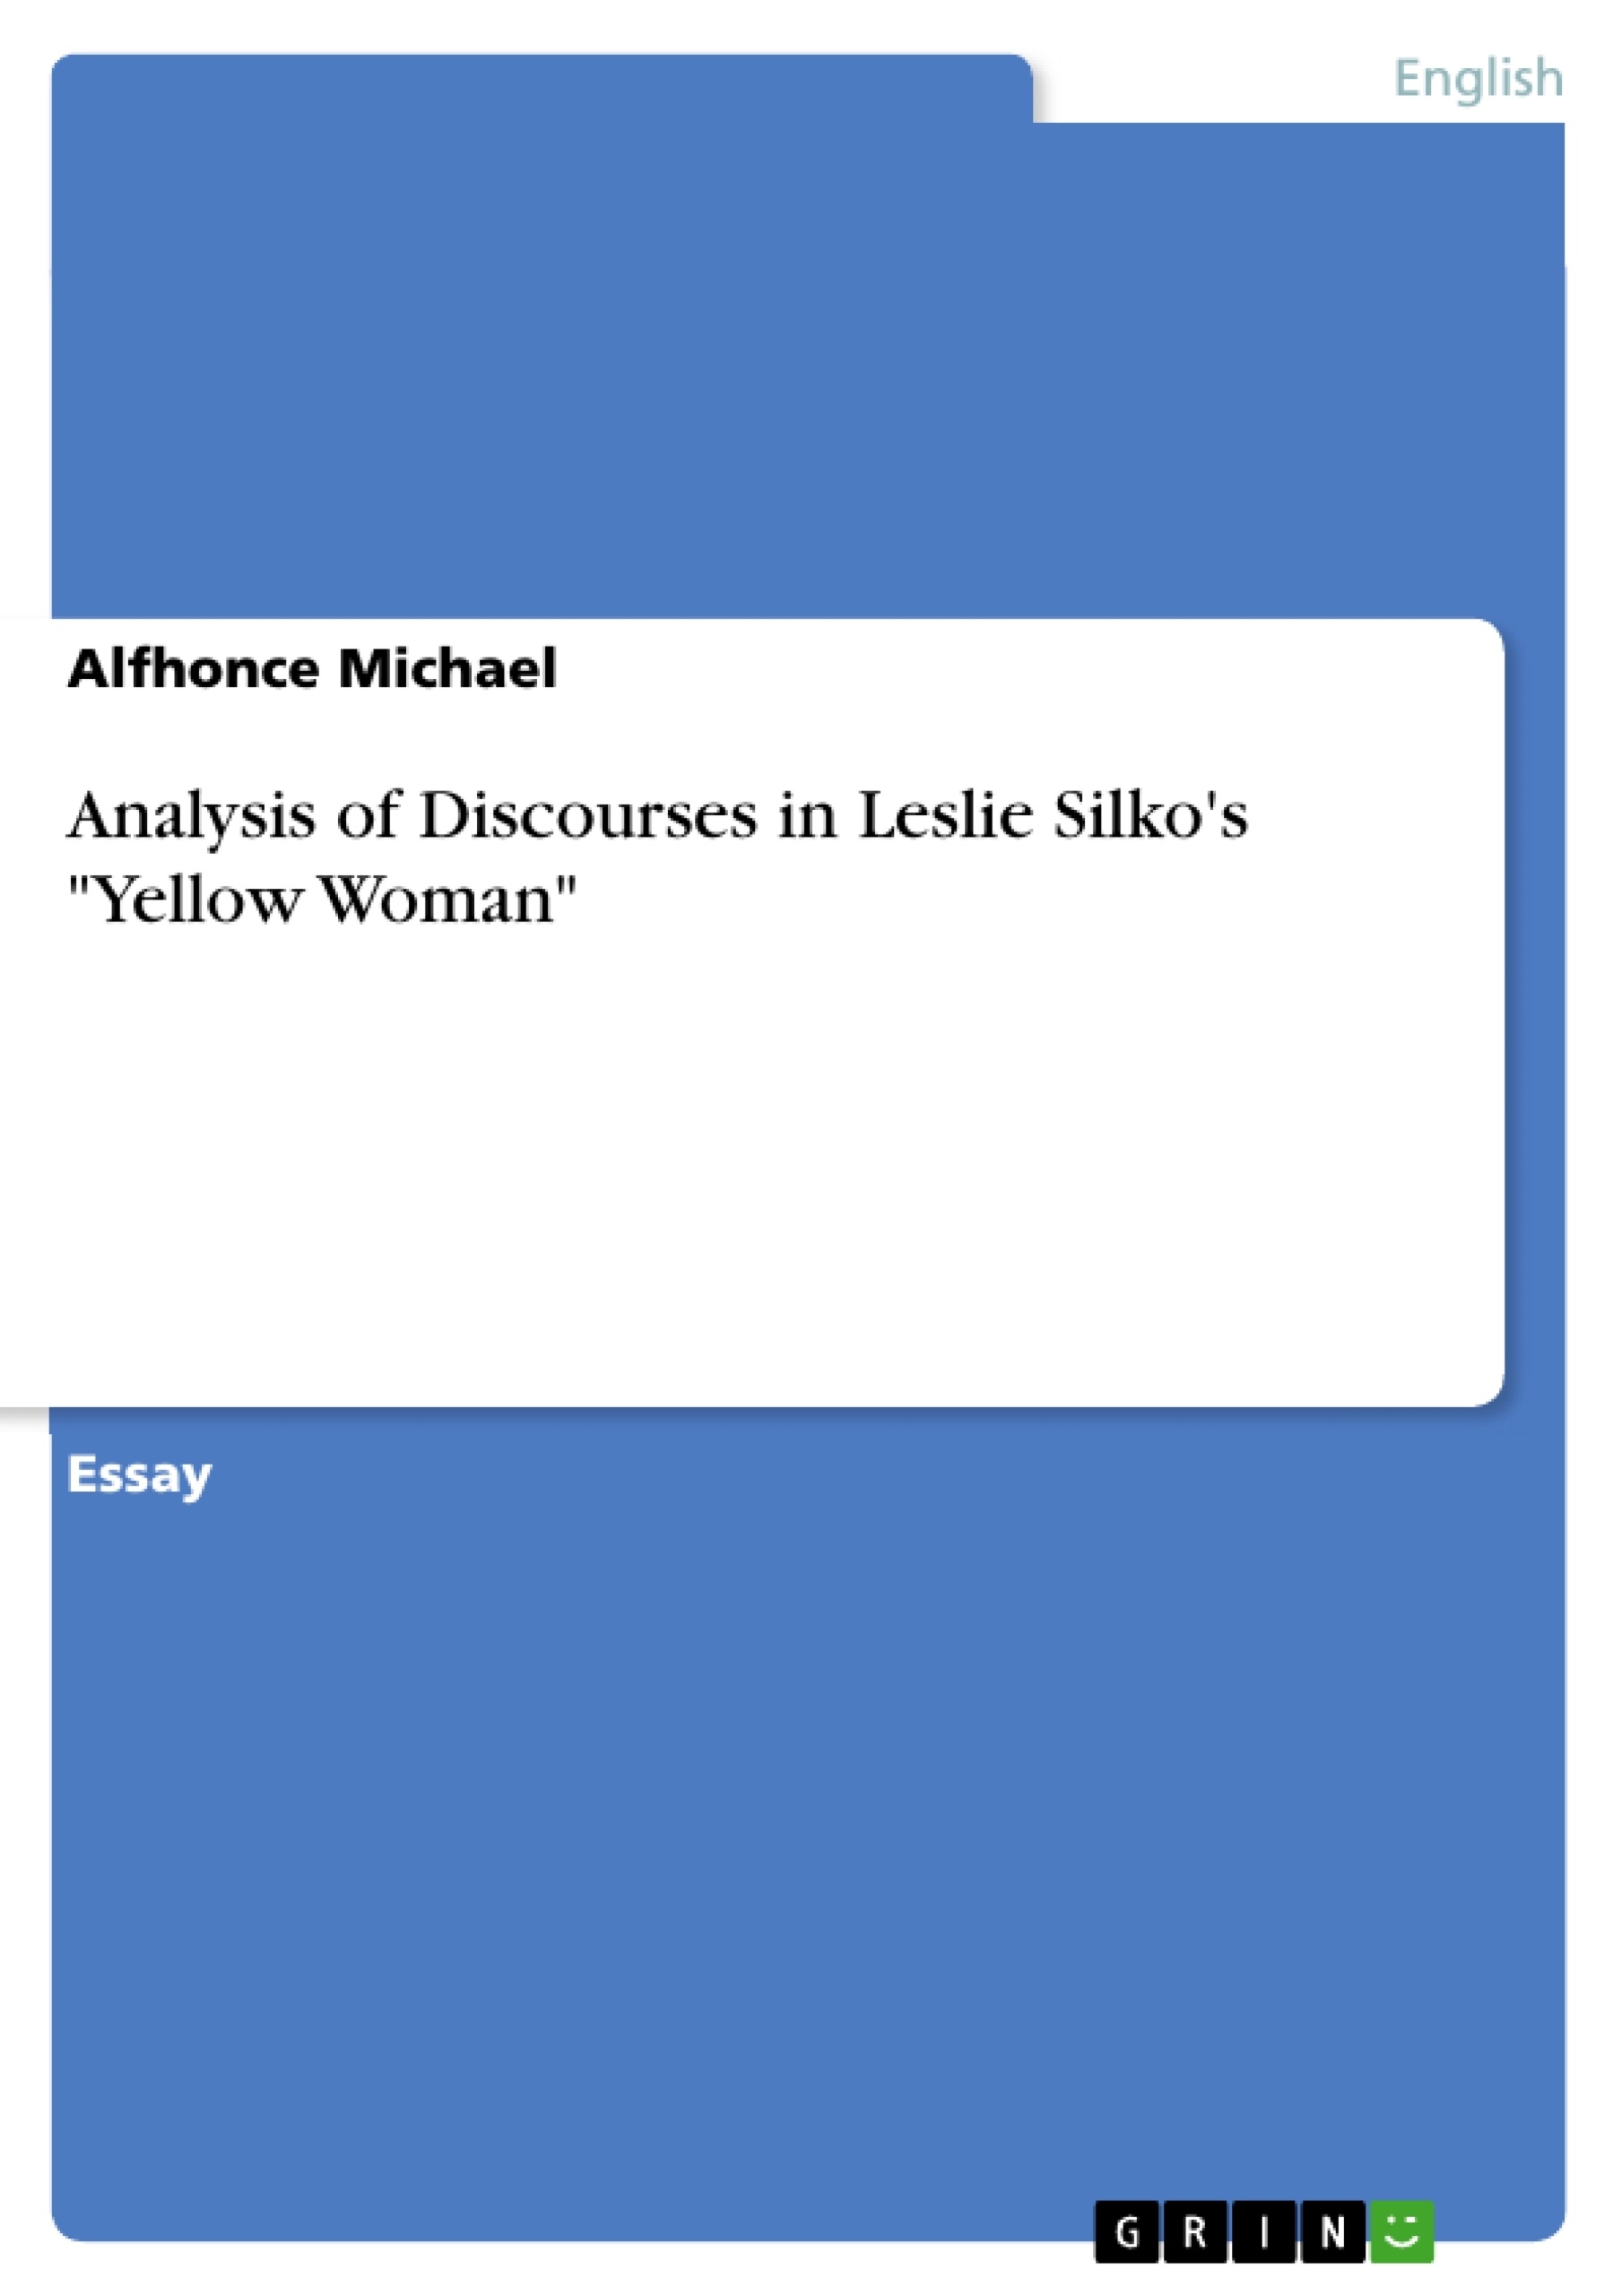 Titre: Analysis of Discourses in Leslie Silko's "Yellow Woman"